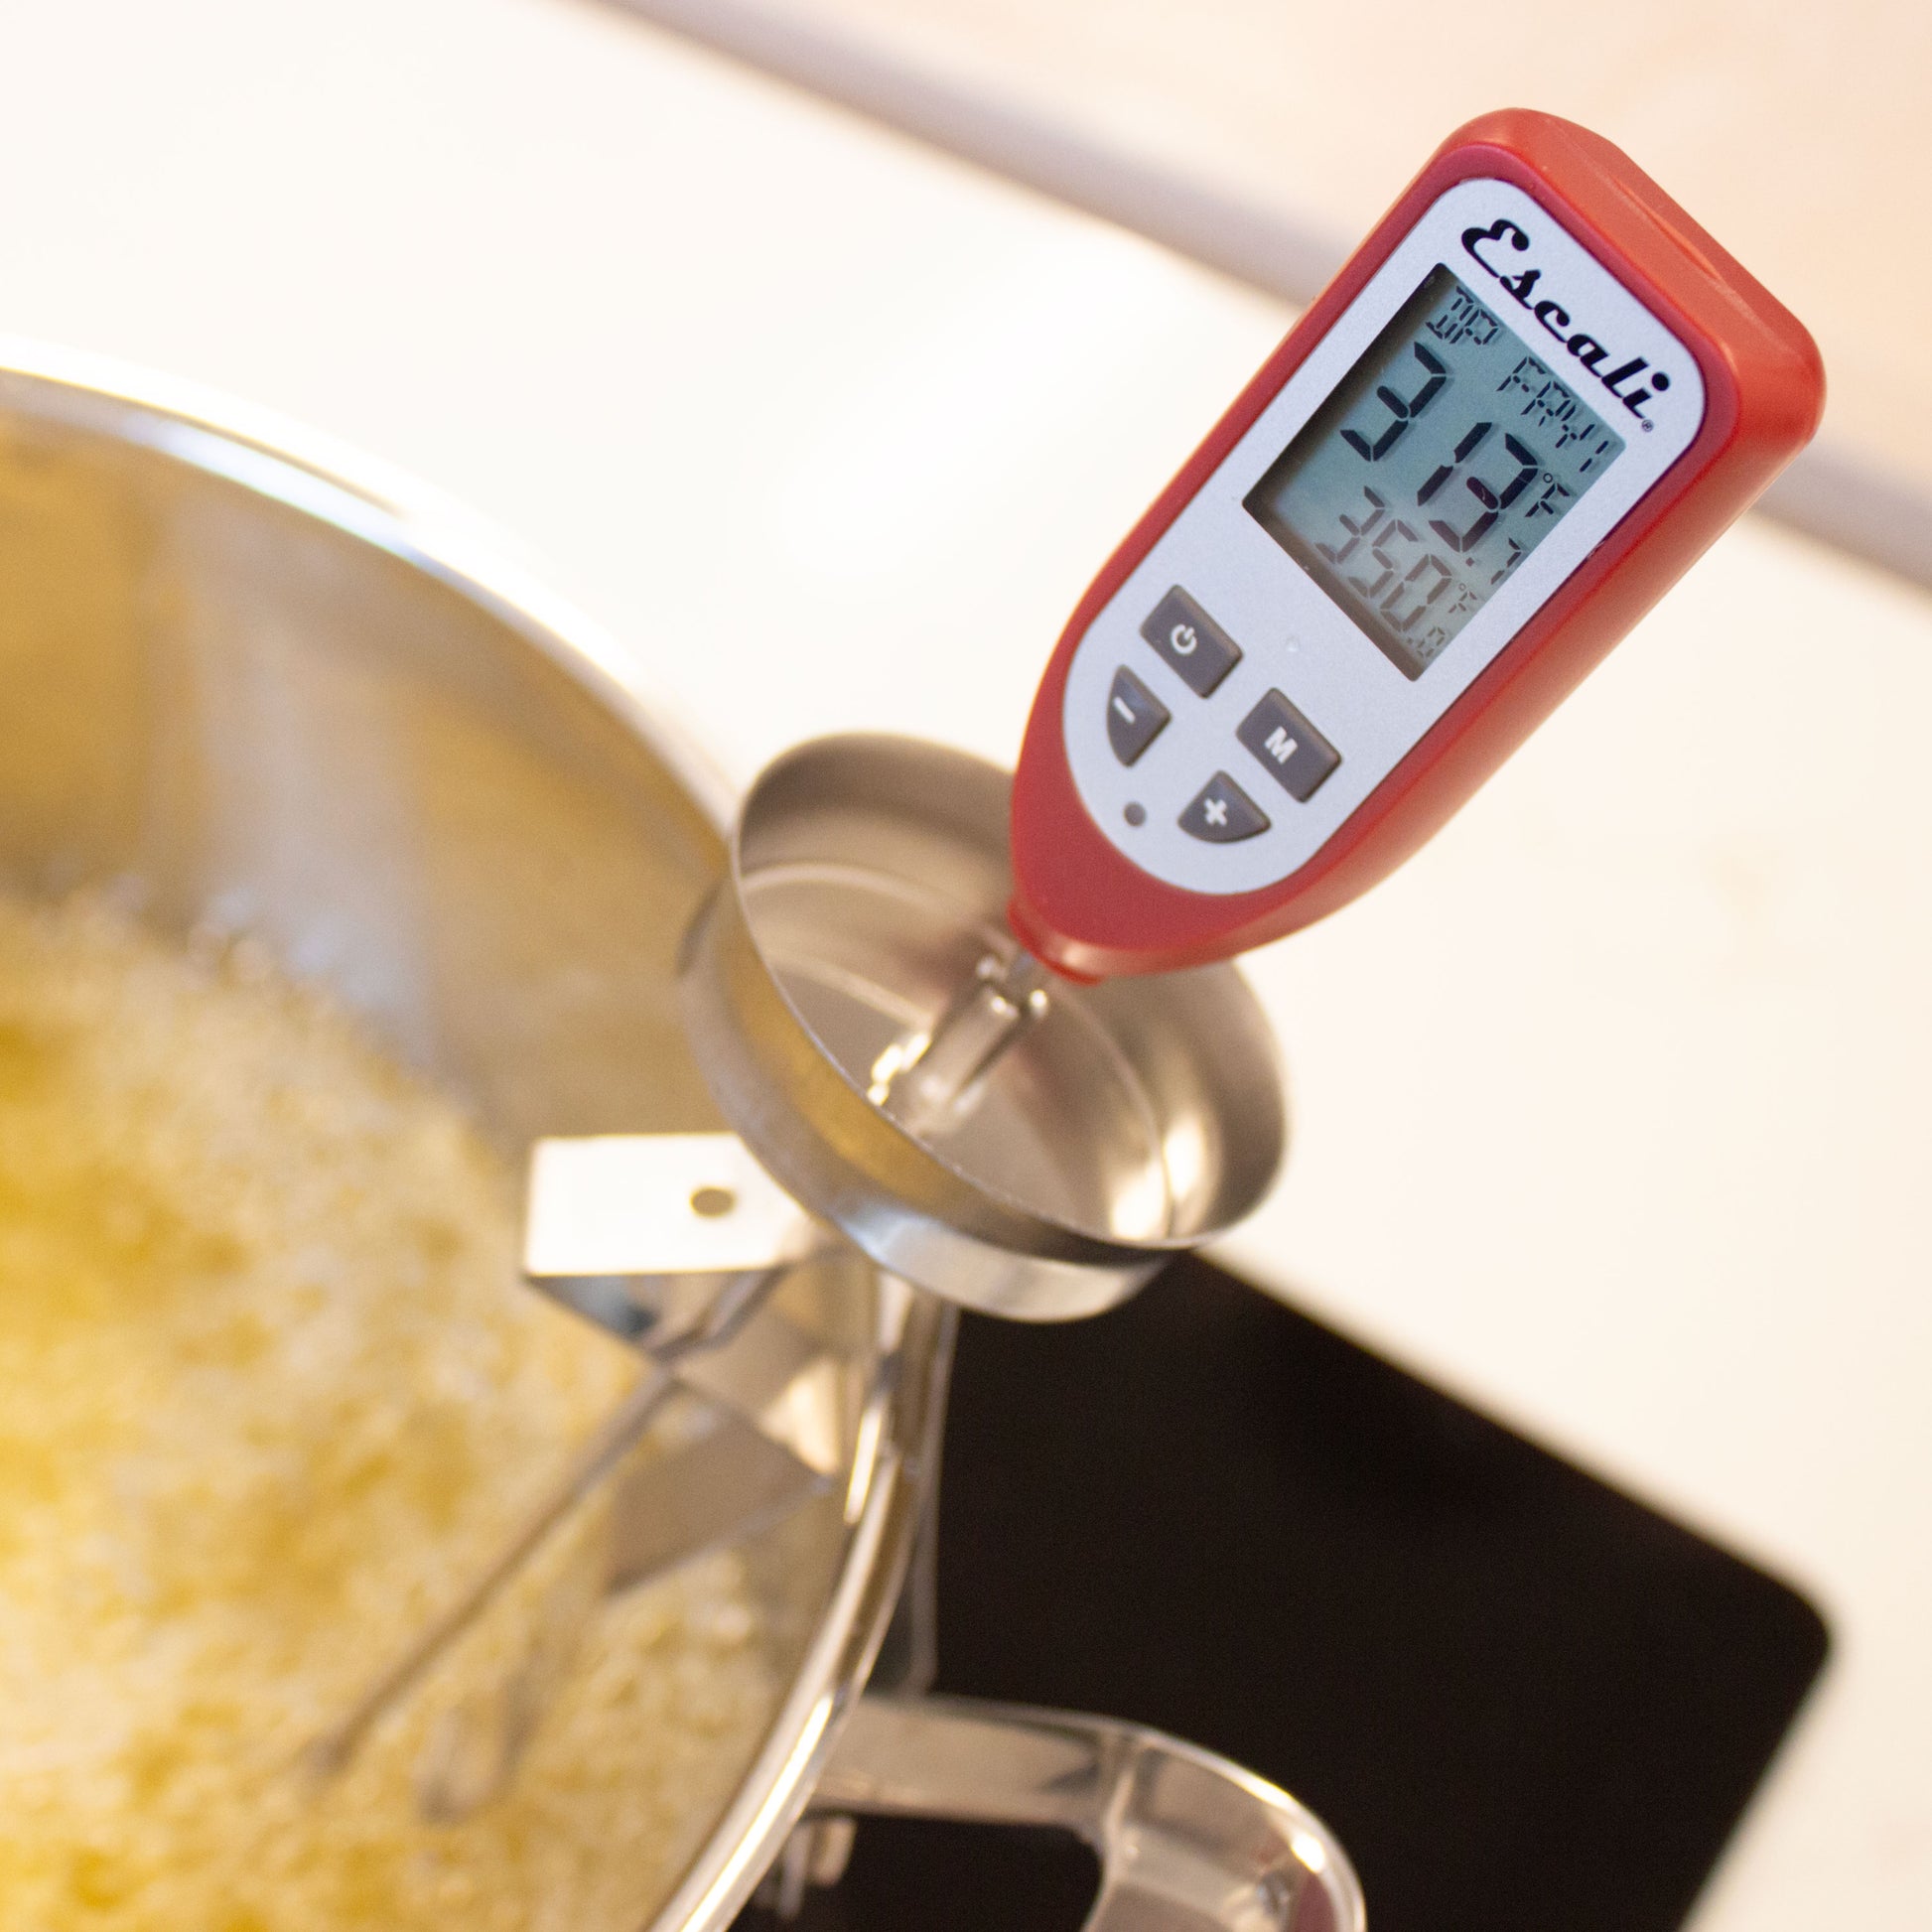 Escali Candy & Deep Fry Thermometer 5.5 Probe